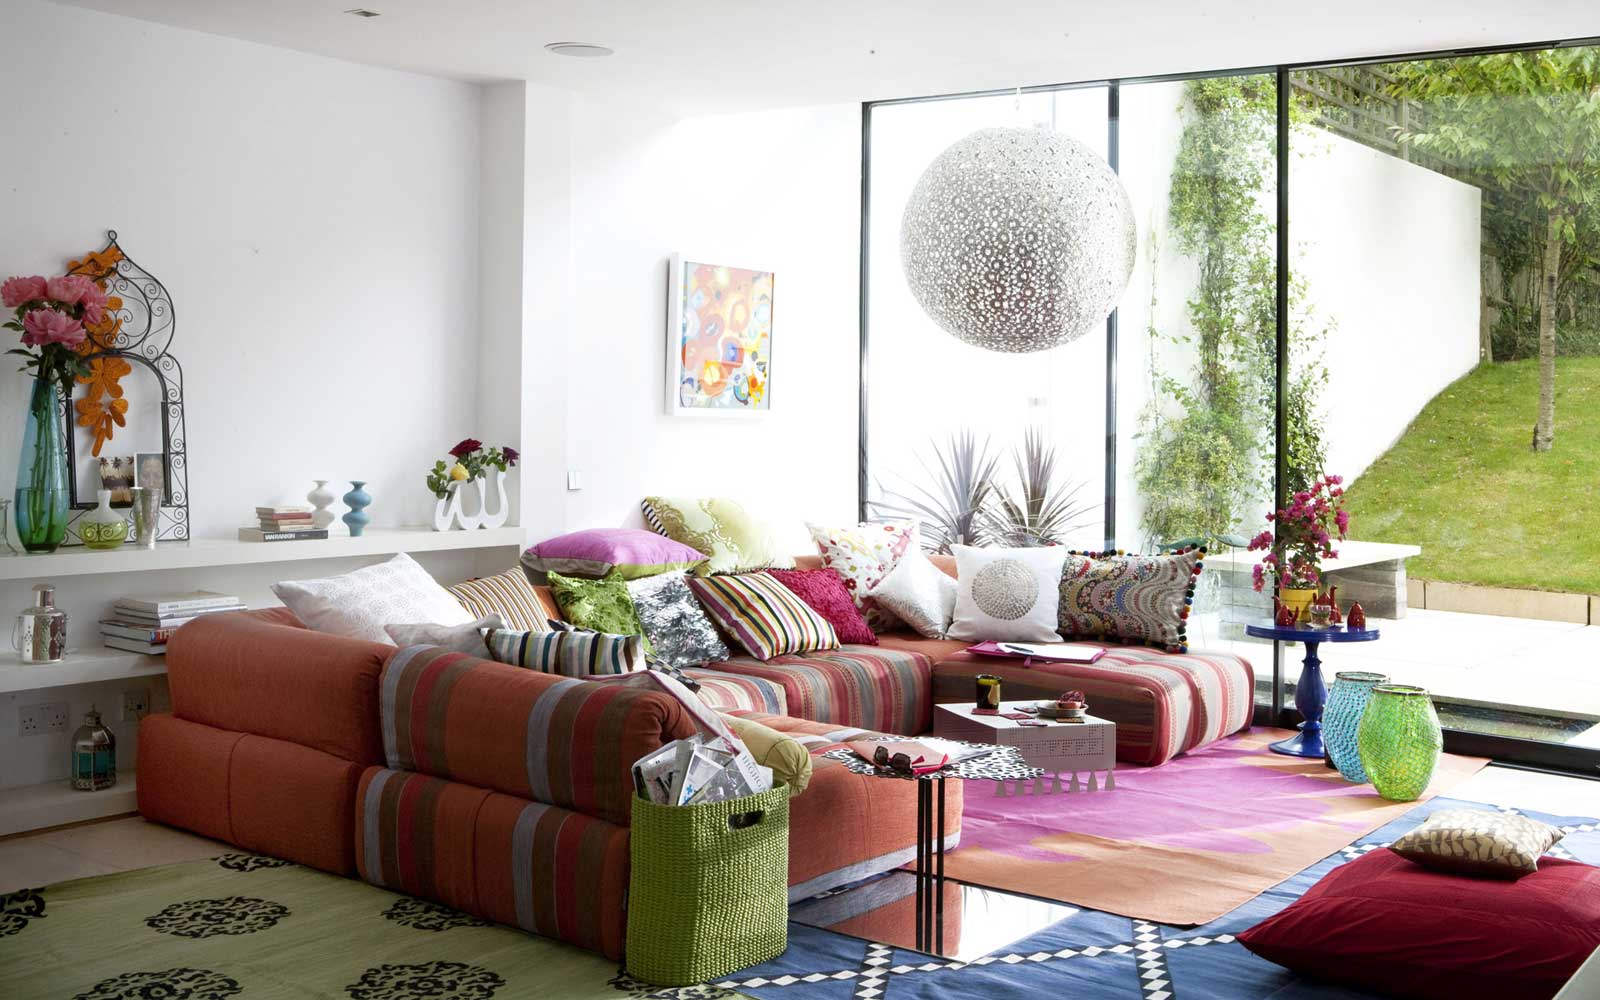 Colorful Small Ideas Amusing Colorful Small Living Room Ideas With Sectional Sofa Completed By Hodgepodge Cushions And Furnished With Nightstands Plus Big Ball Pendant Lamp Living Room Stylish Small Living Room Ideas